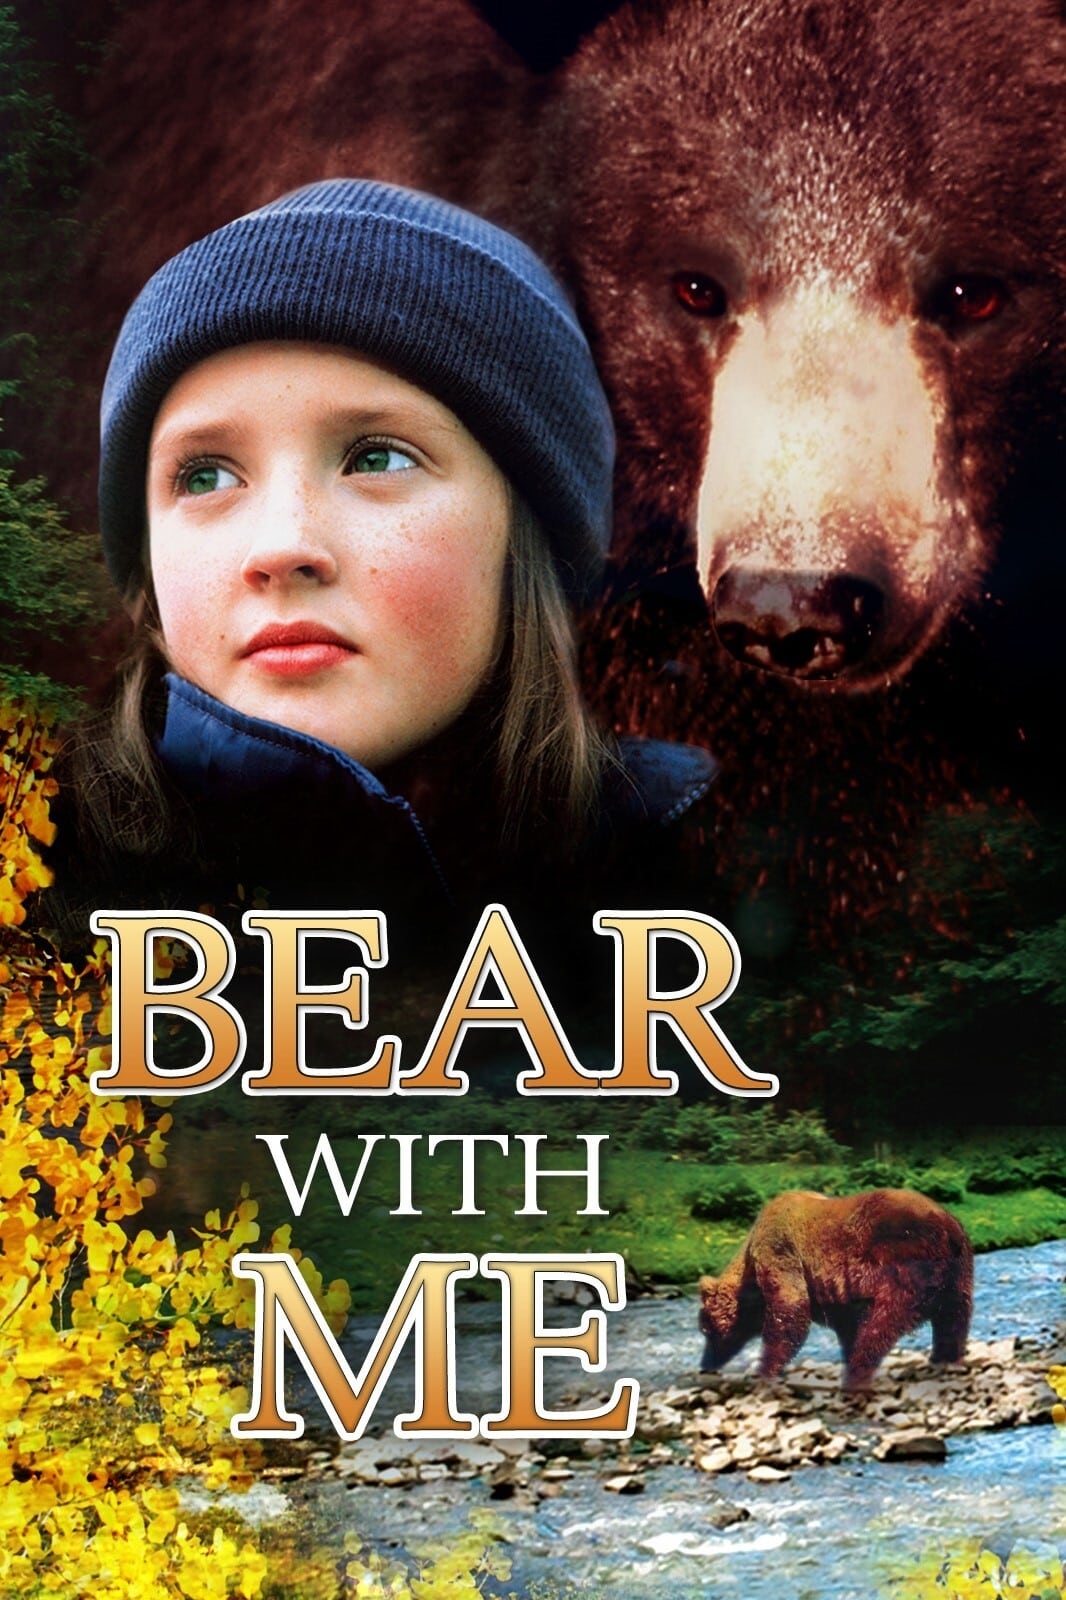 Bear with Me (2000)